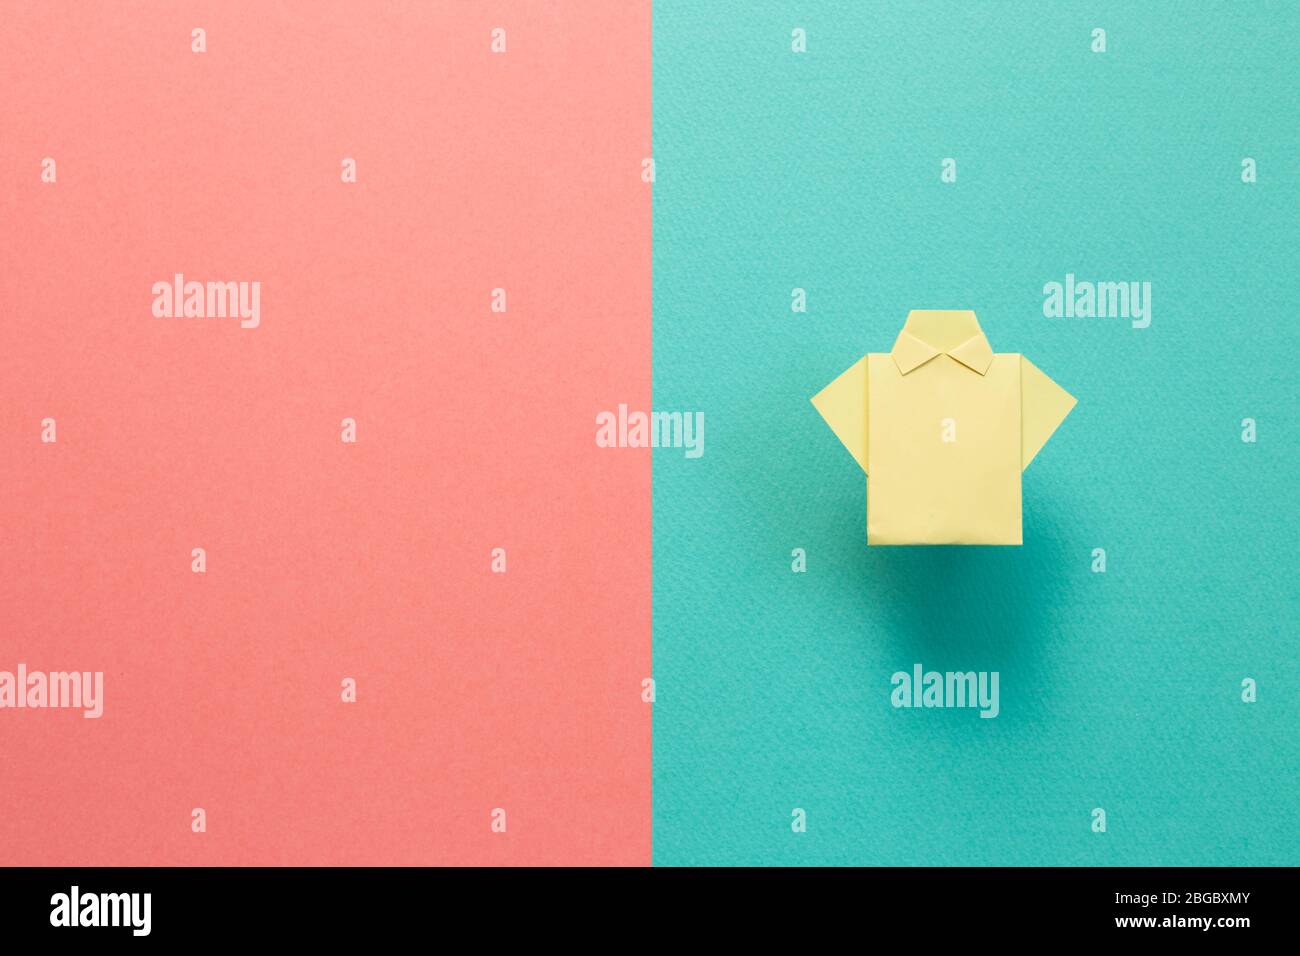 Yellow paper shirt origami on green pink background Stock Photo